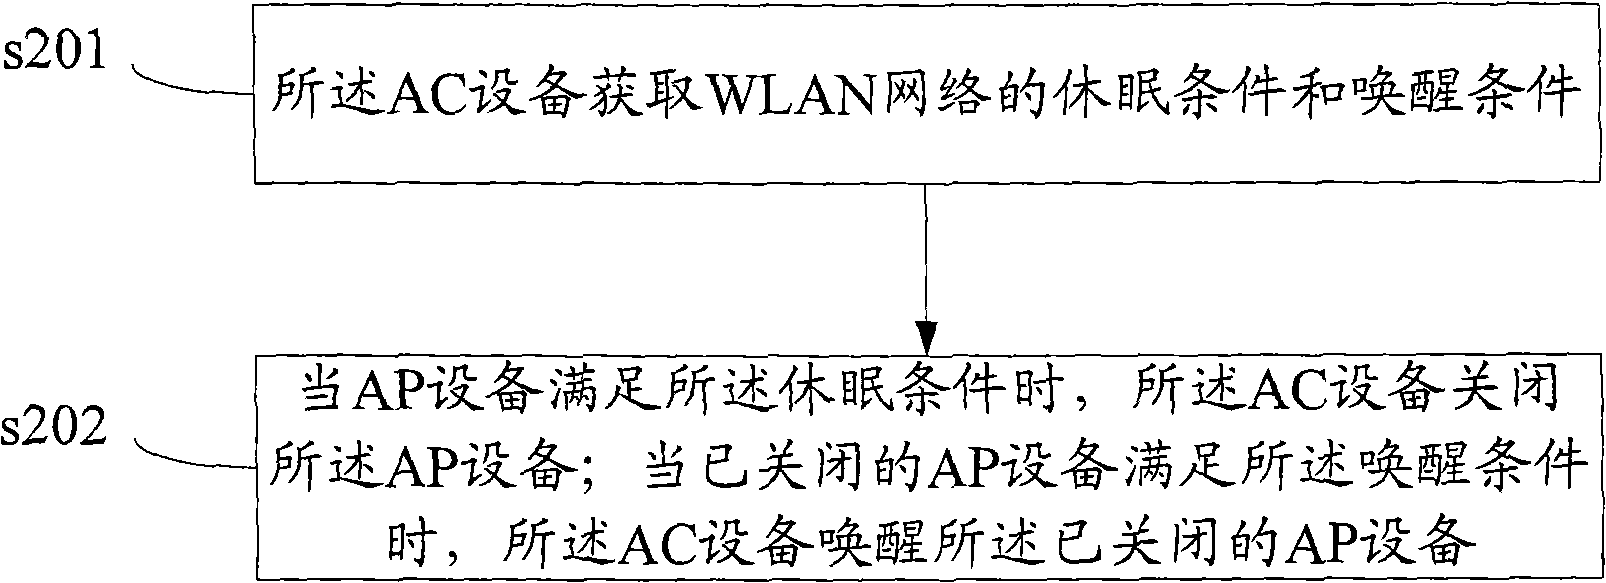 WLAN network control method and device thereof